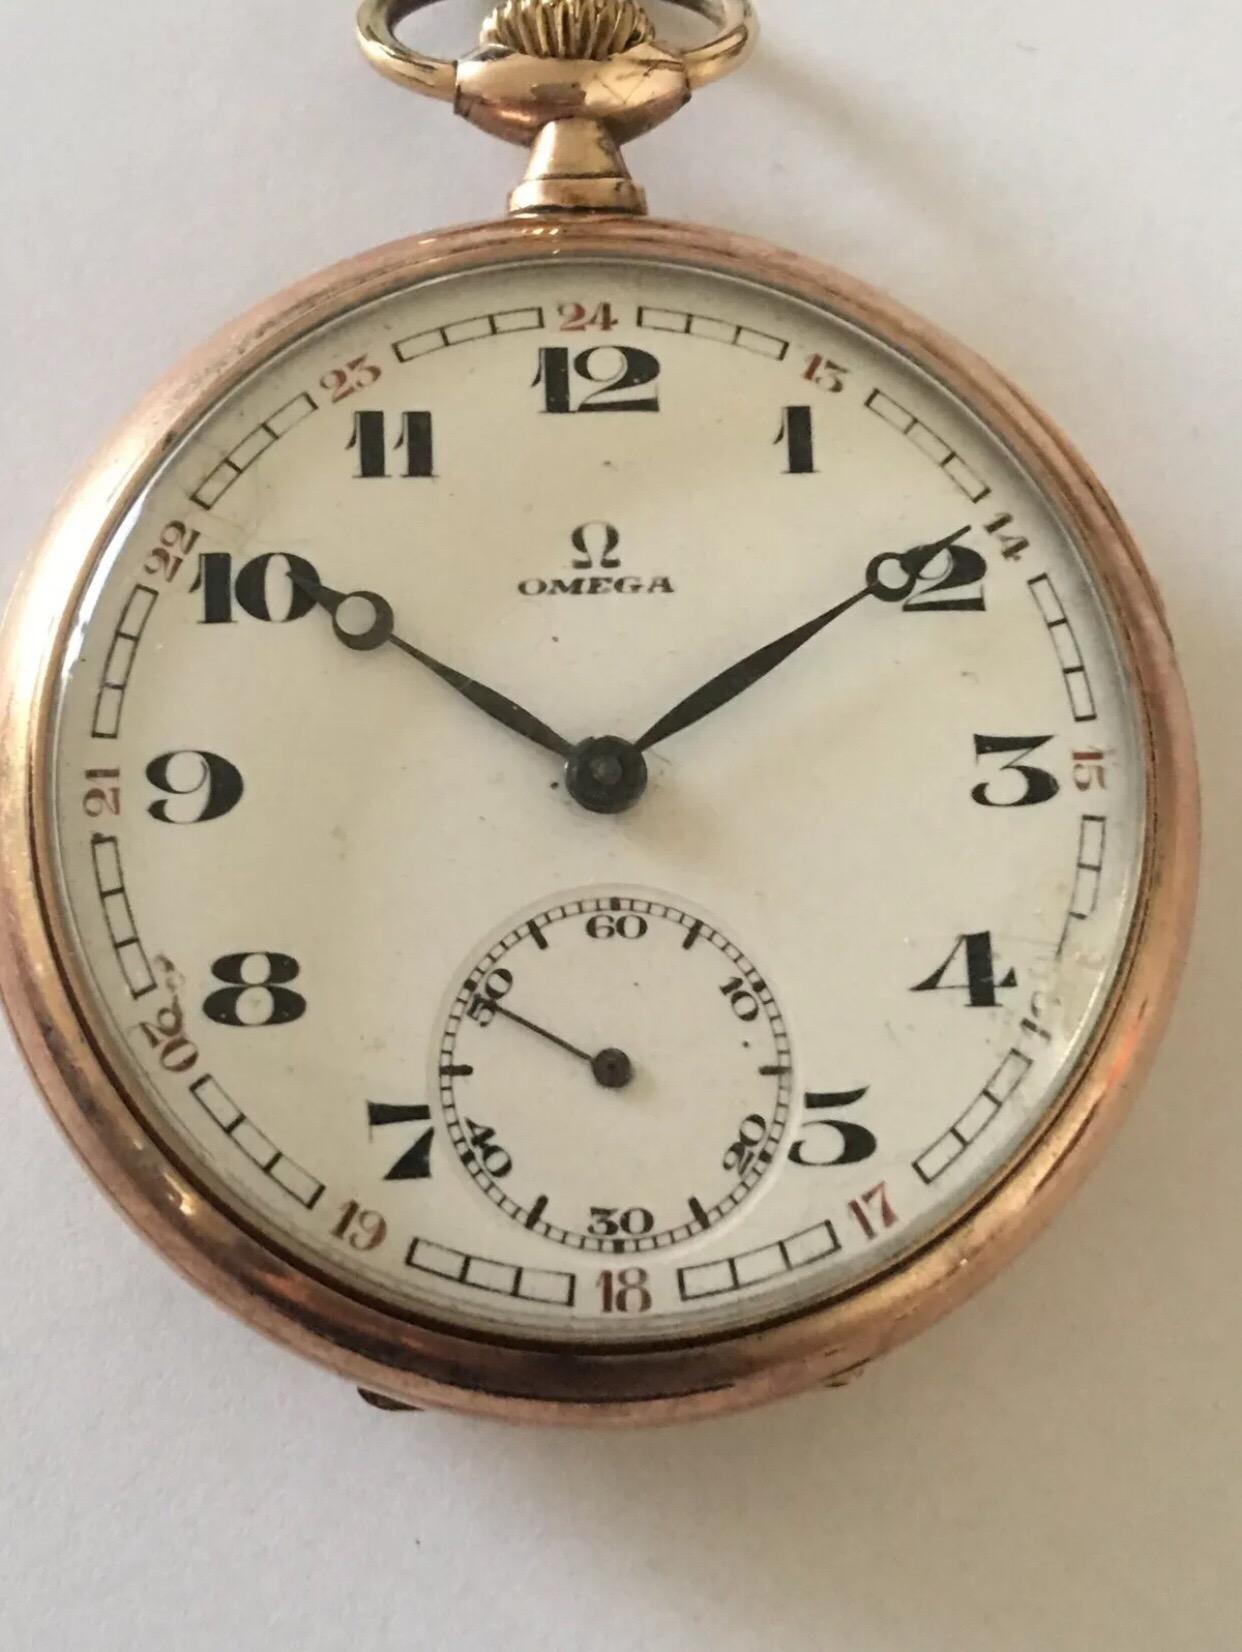 This charming Omega Gents Pocket watch is in good working condition and ticking nicely. There is a bit of a crack on the dial and a tiny messed up on dial restoration nearside on 4 o’clock.